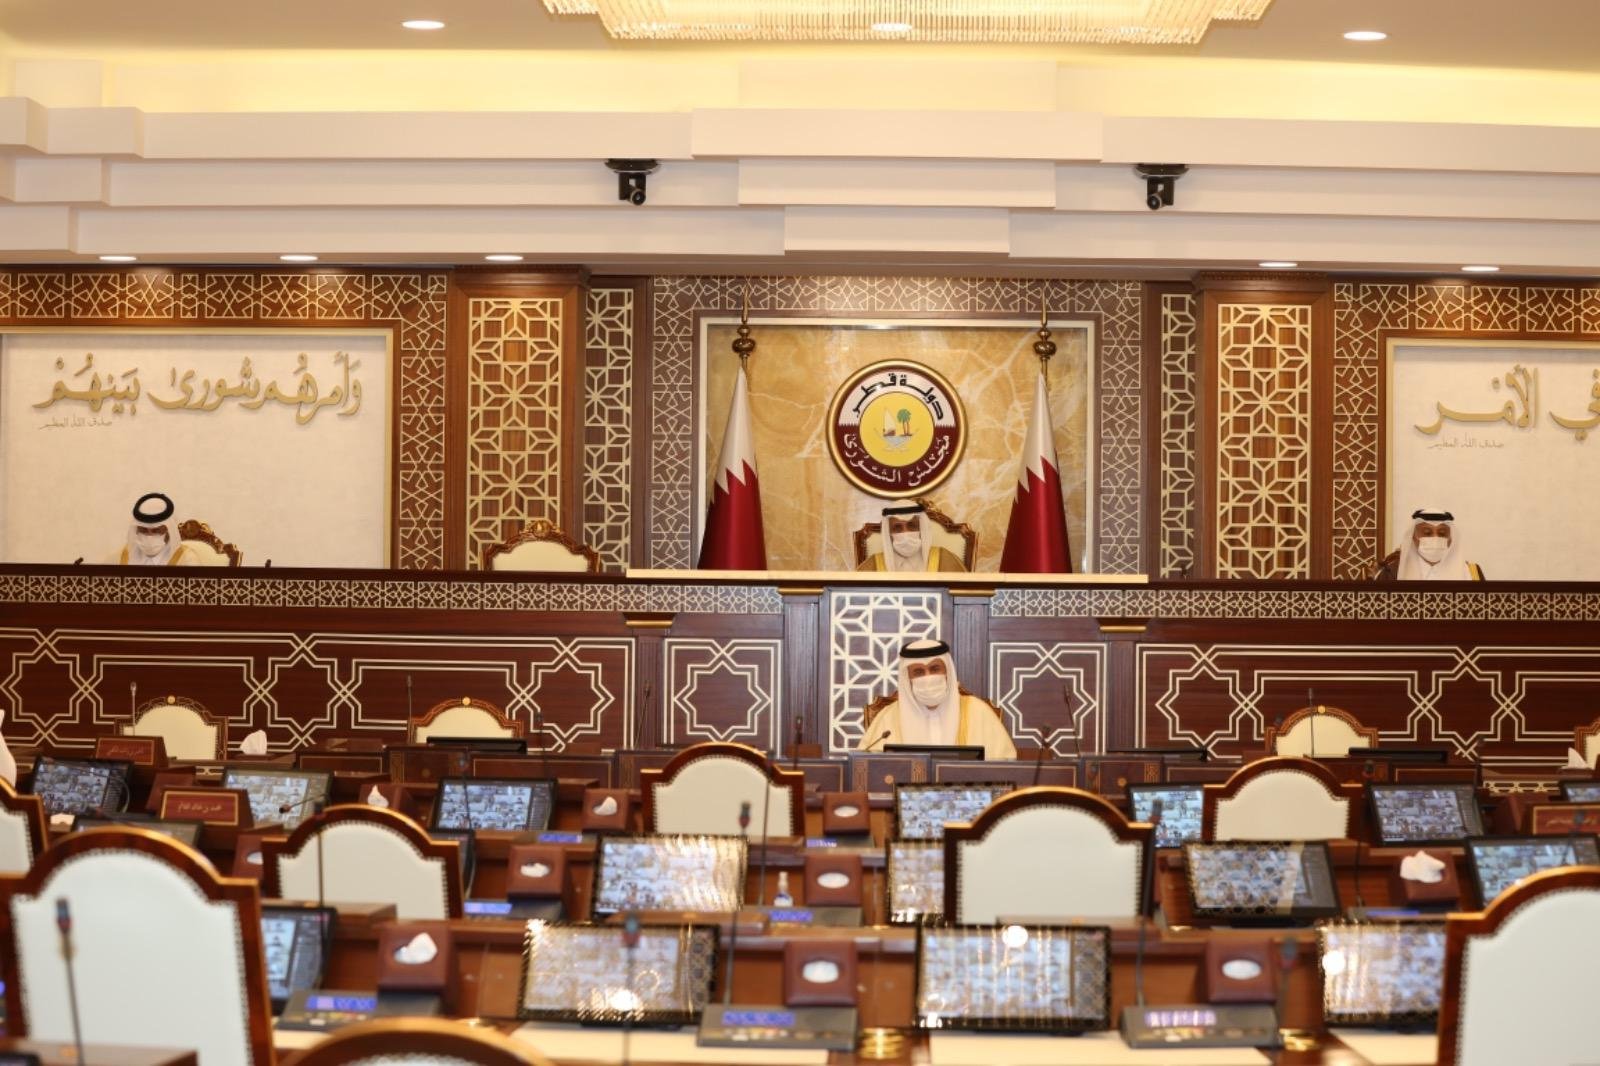 Qatar : Amir Of Qatar Issues Shura Council Electoral System Law, Voter Registration Starts From August 1st